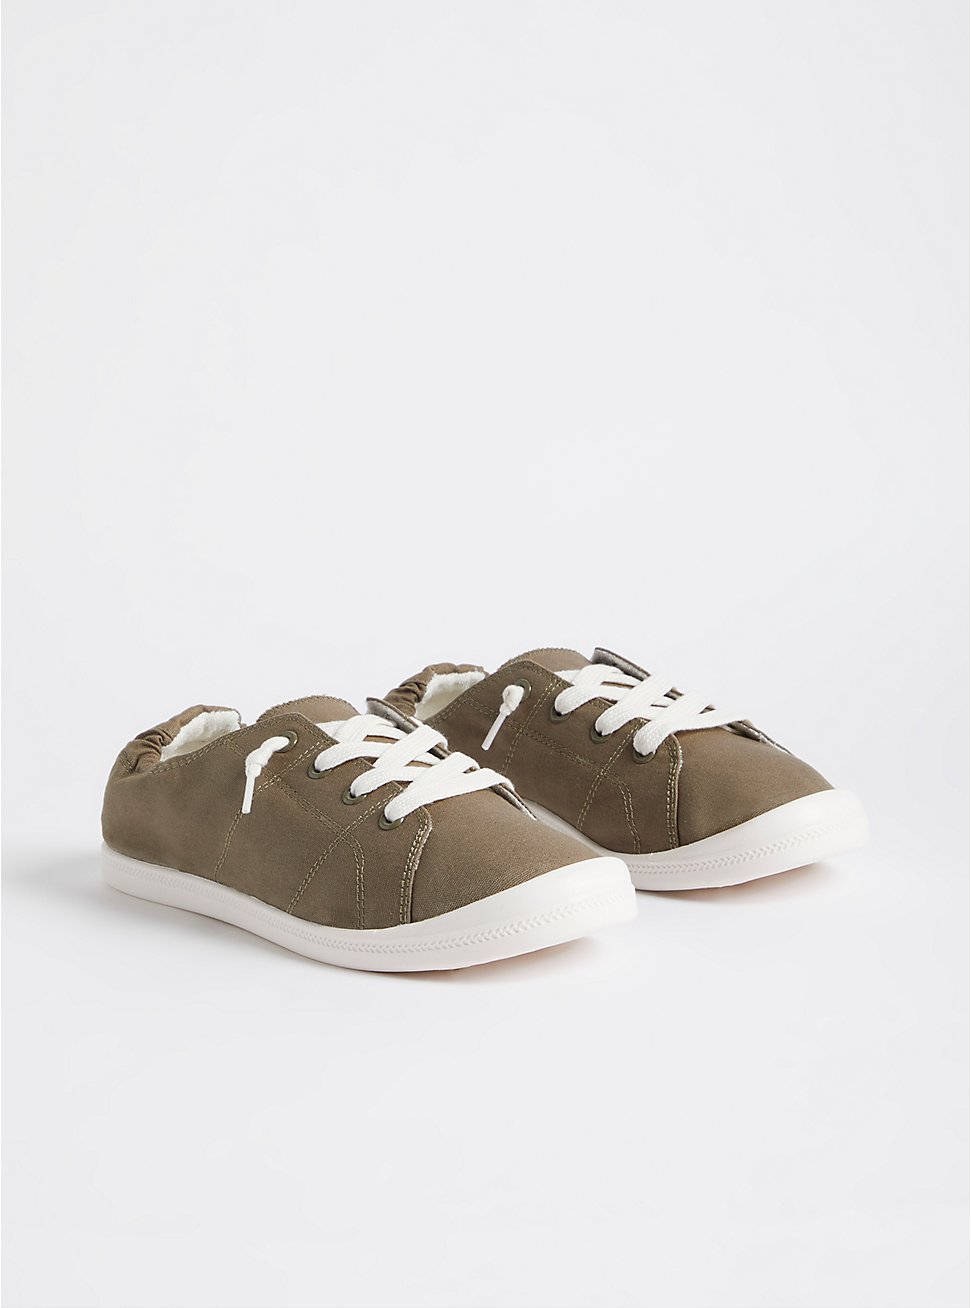 Plus Size Riley Sneaker - Ruched Canvas Olive (WW), OLIVE, hi-res